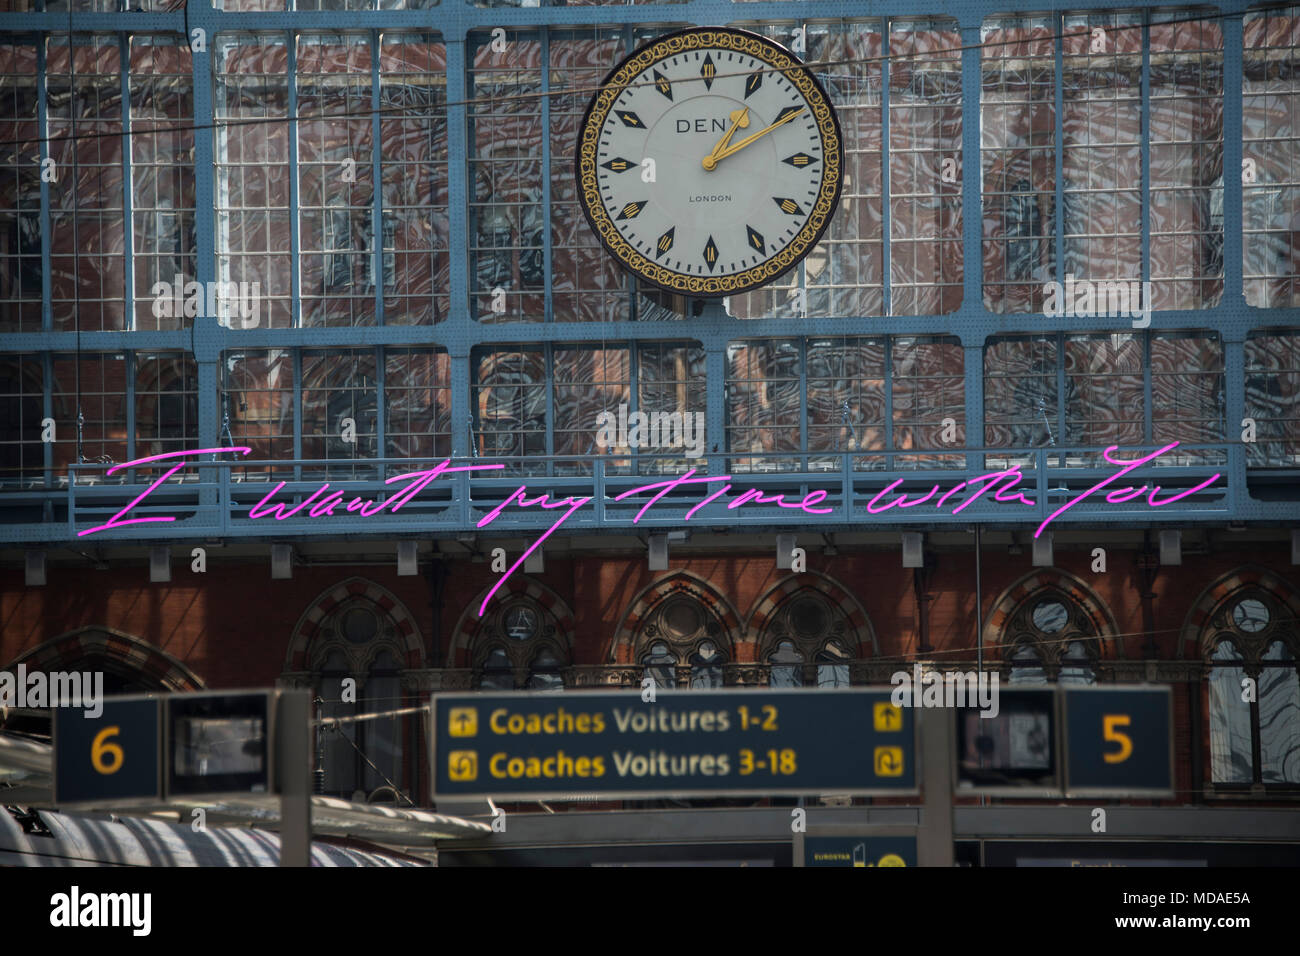 London, UK. 19th April 2018. The new neon artwork by Tracey Emin hangs over the international station at St Pancras - the message for lovers is 'I want my time with you'.Credit: Guy Bell/Alamy Live News Stock Photo